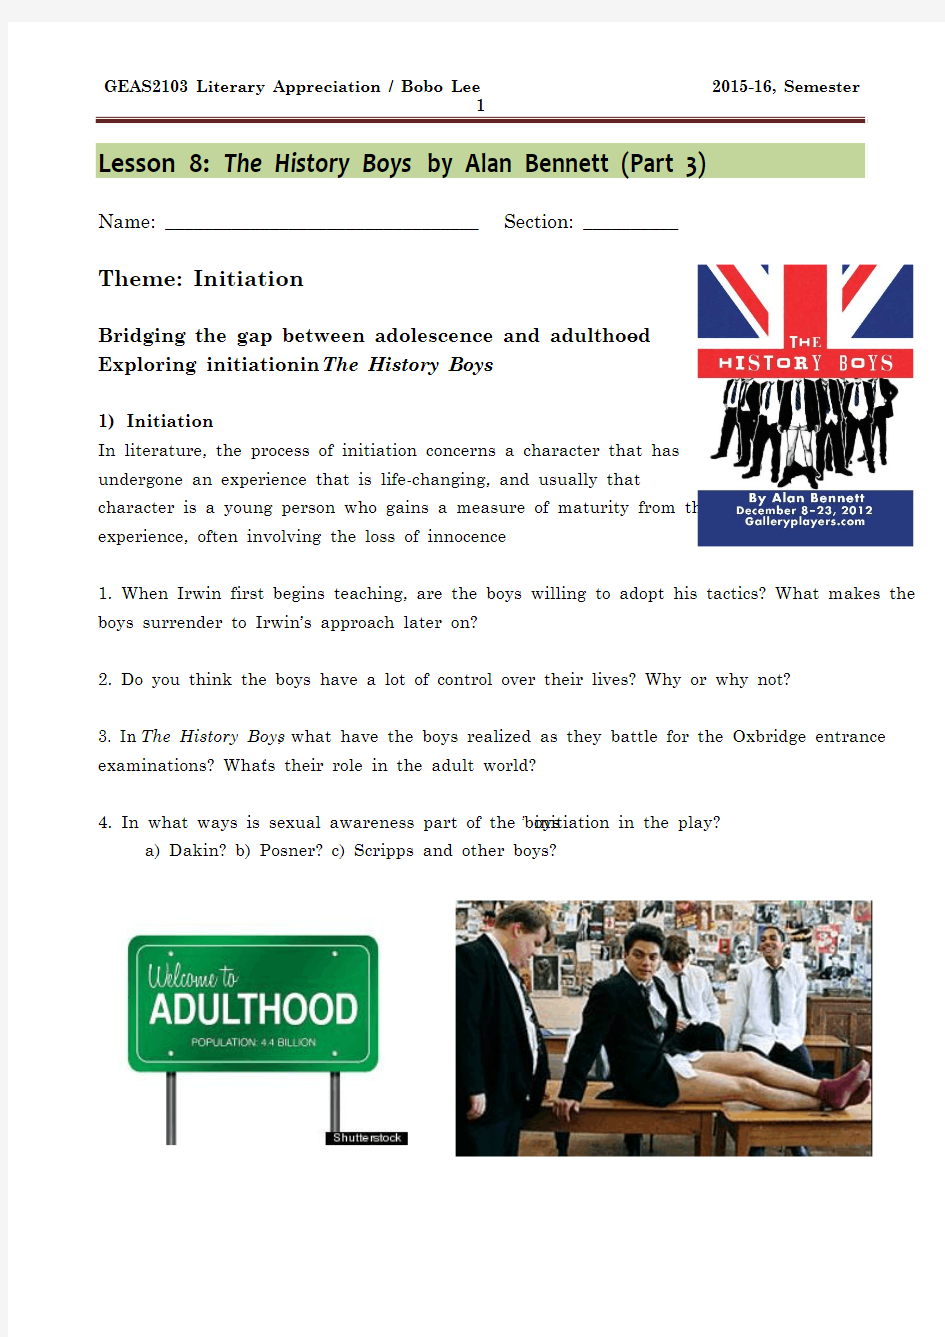 Lesson 8 - The History Boys by Alan Bennett (Part 3) - 2015